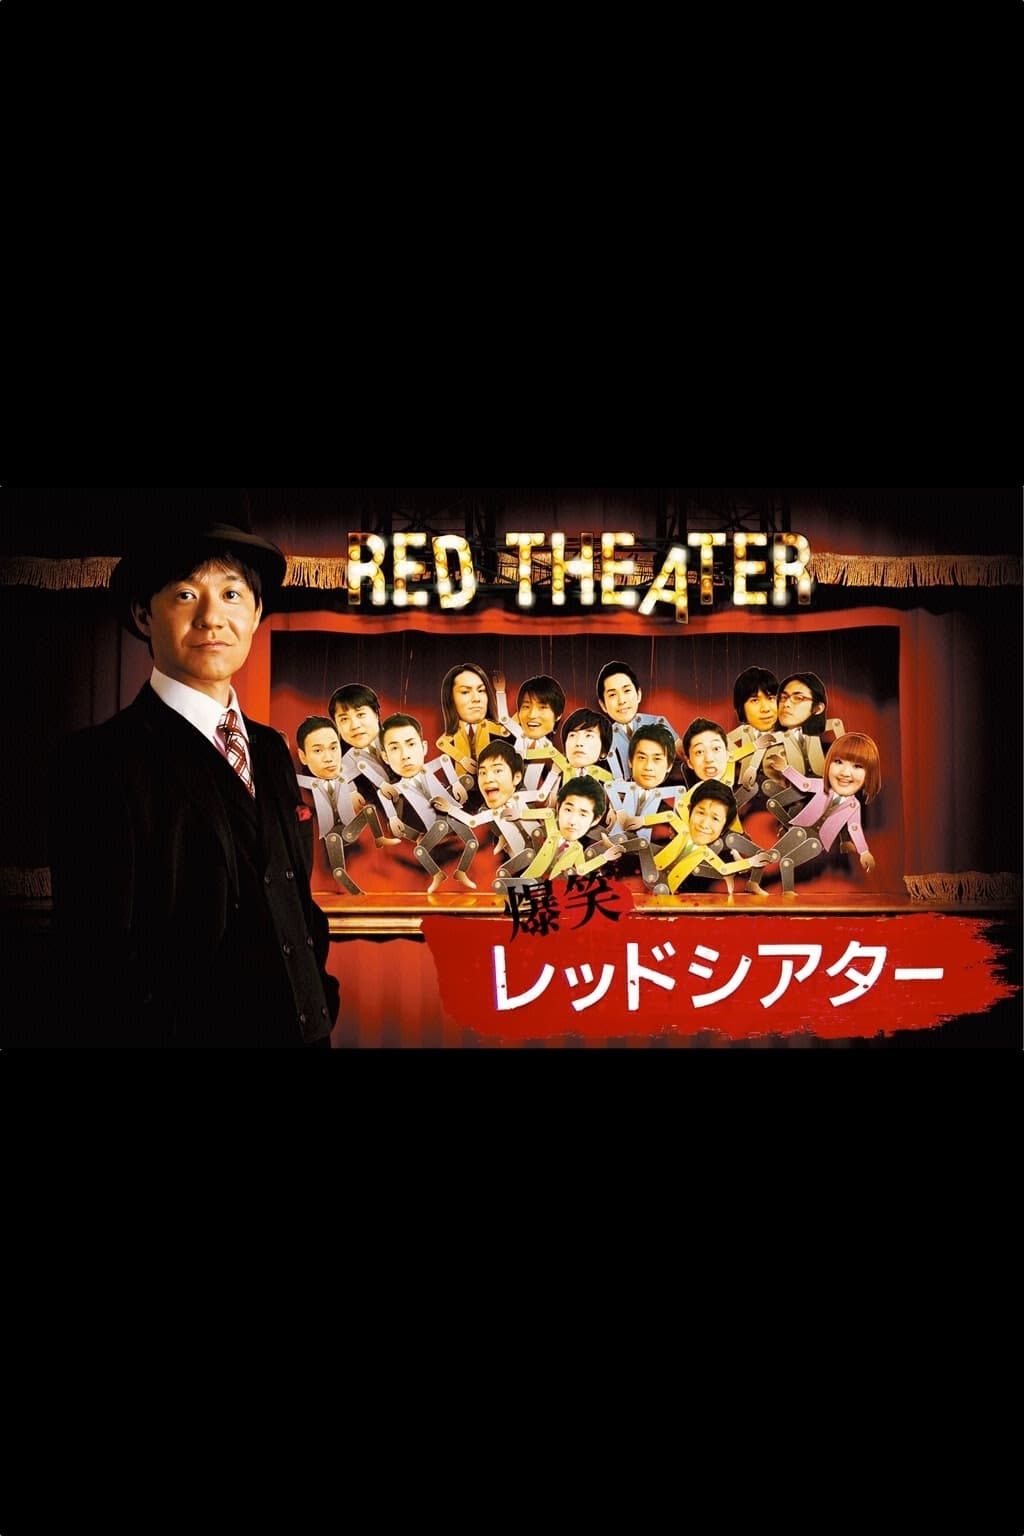 THE RED THEATER